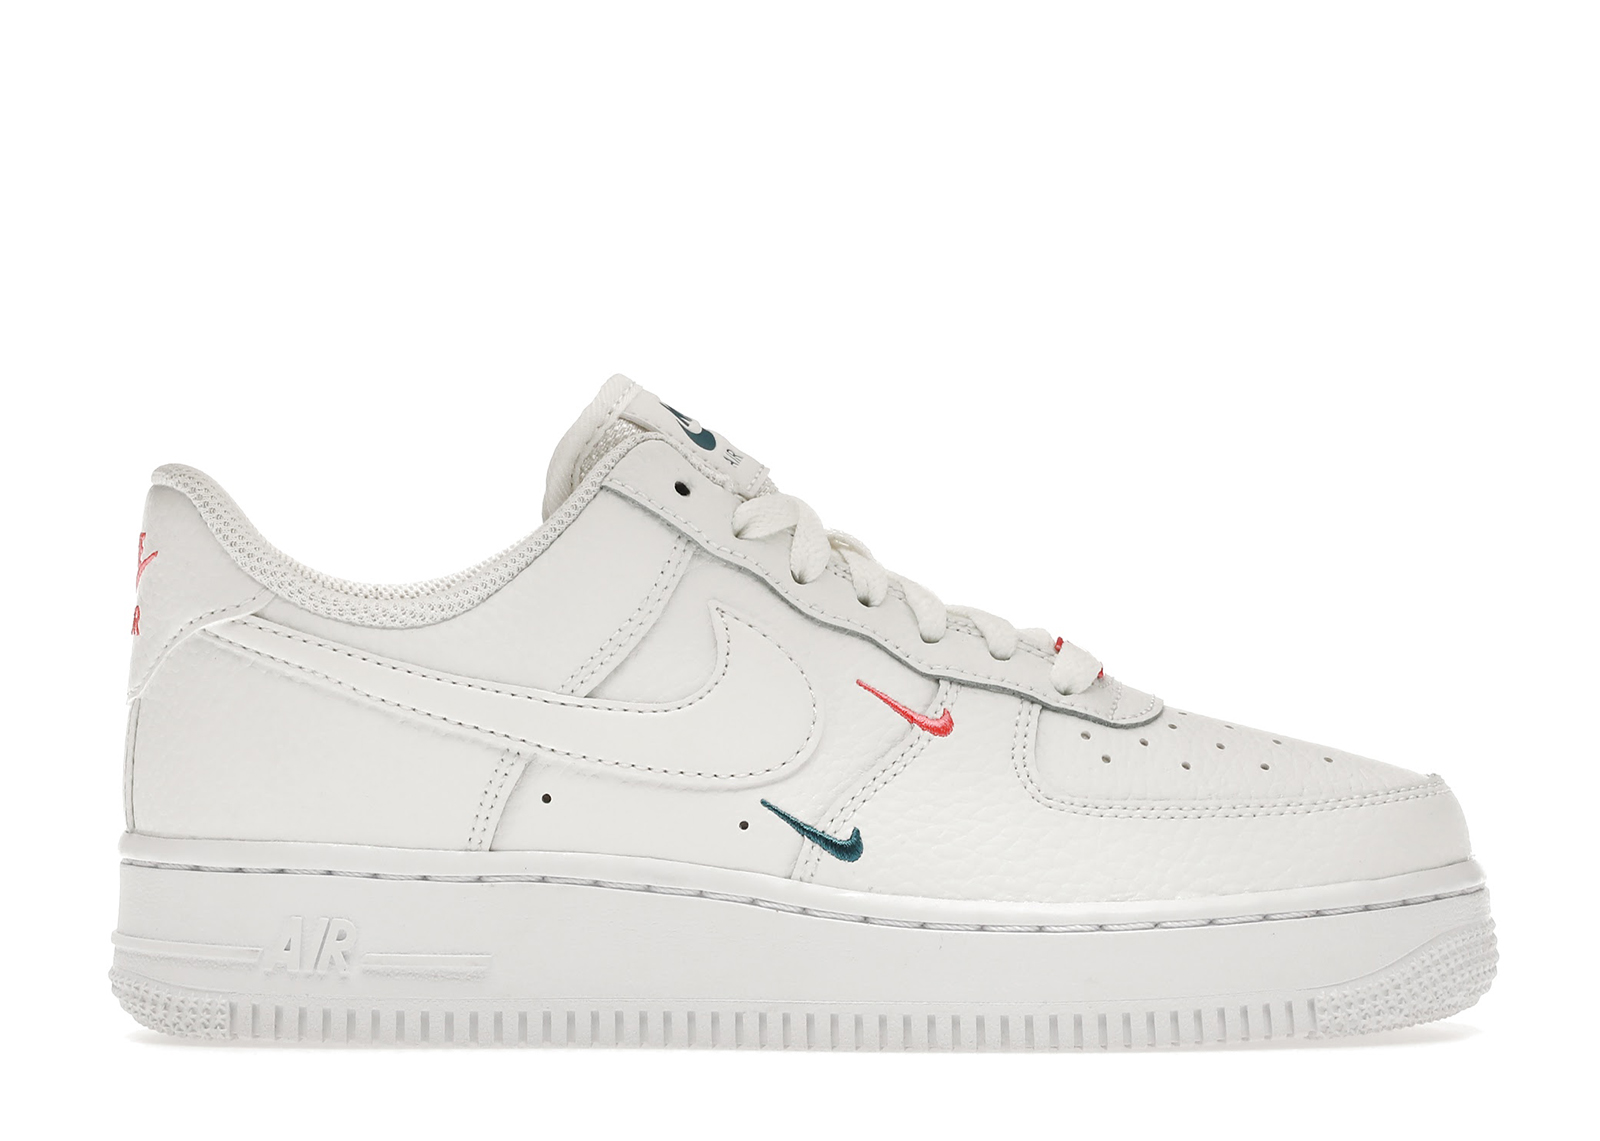 Nike Air Force 1 Low '07 Essential Double Mini Swoosh Miami 